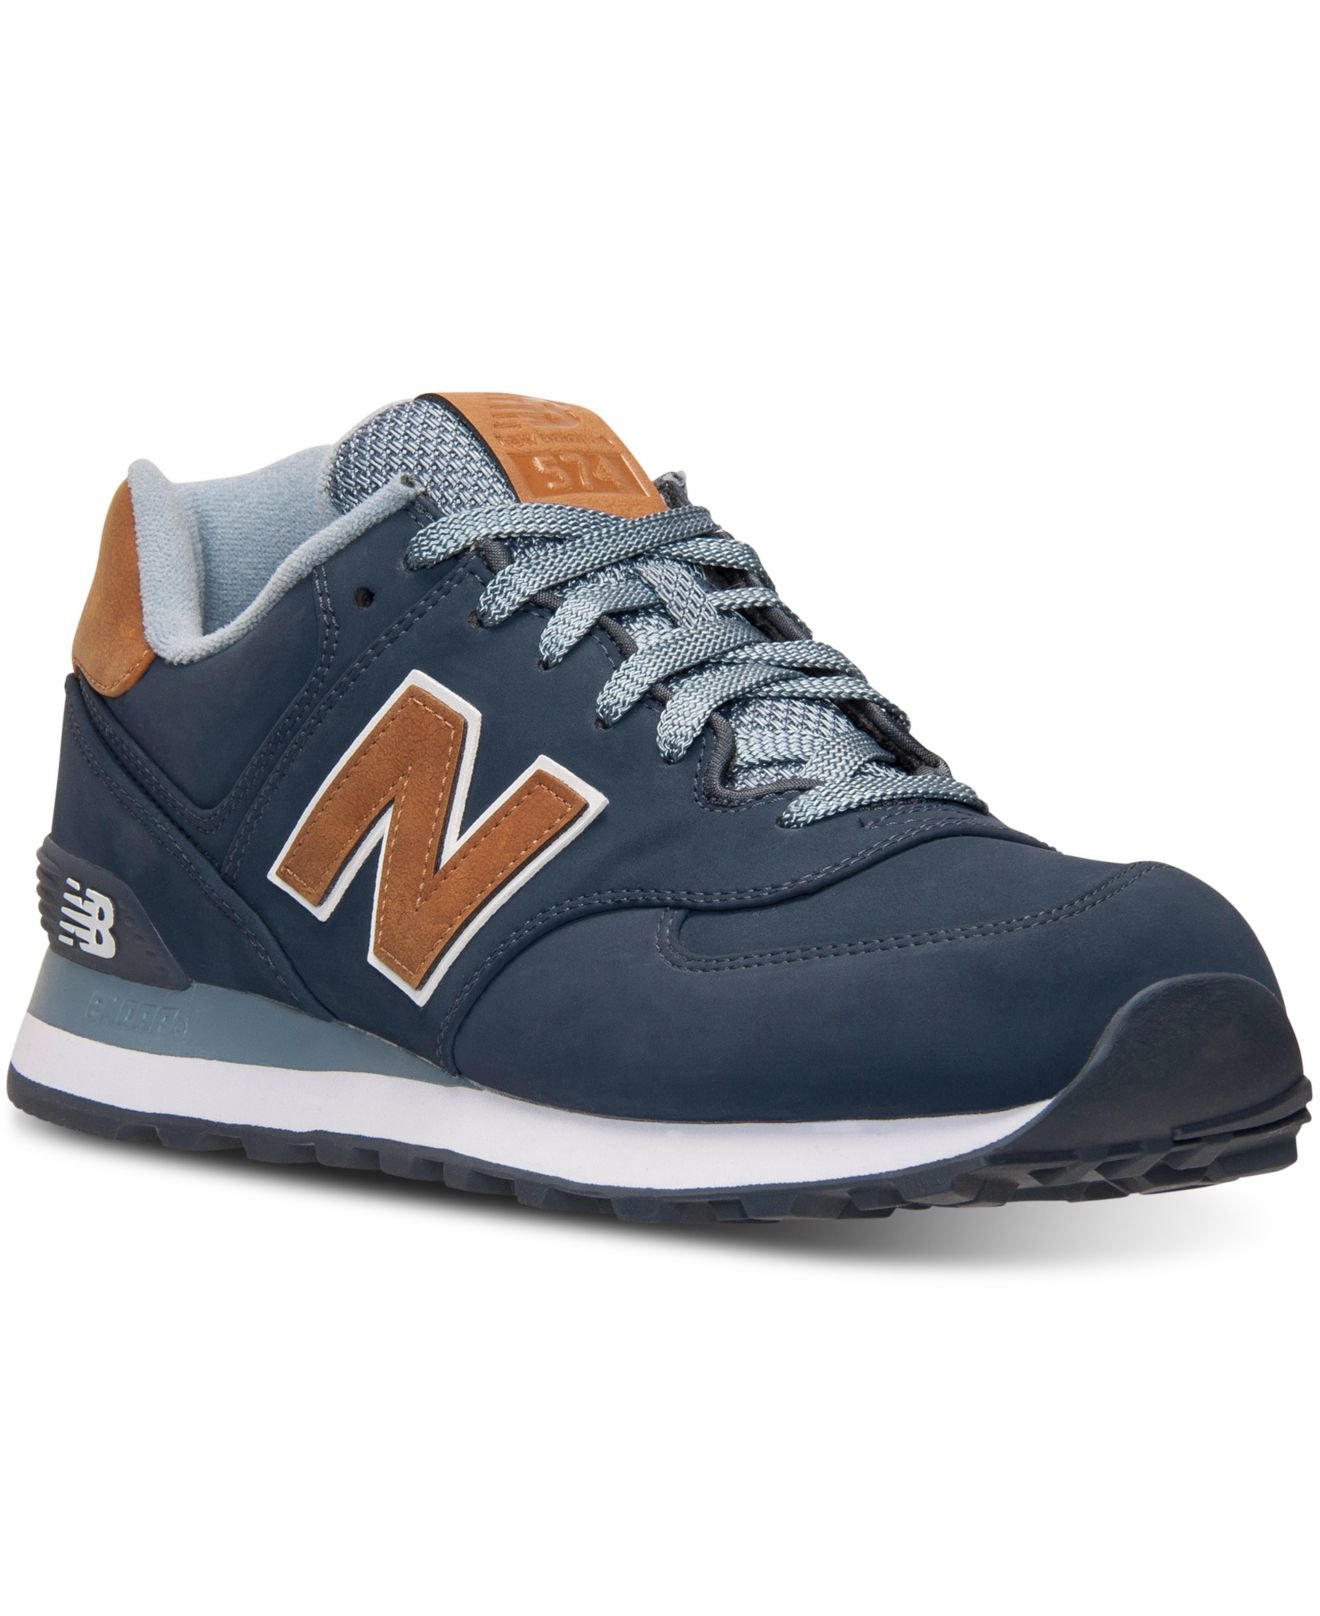 Lyst - New Balance Men's 574 Casual Sneakers From Finish Line in Gray ...